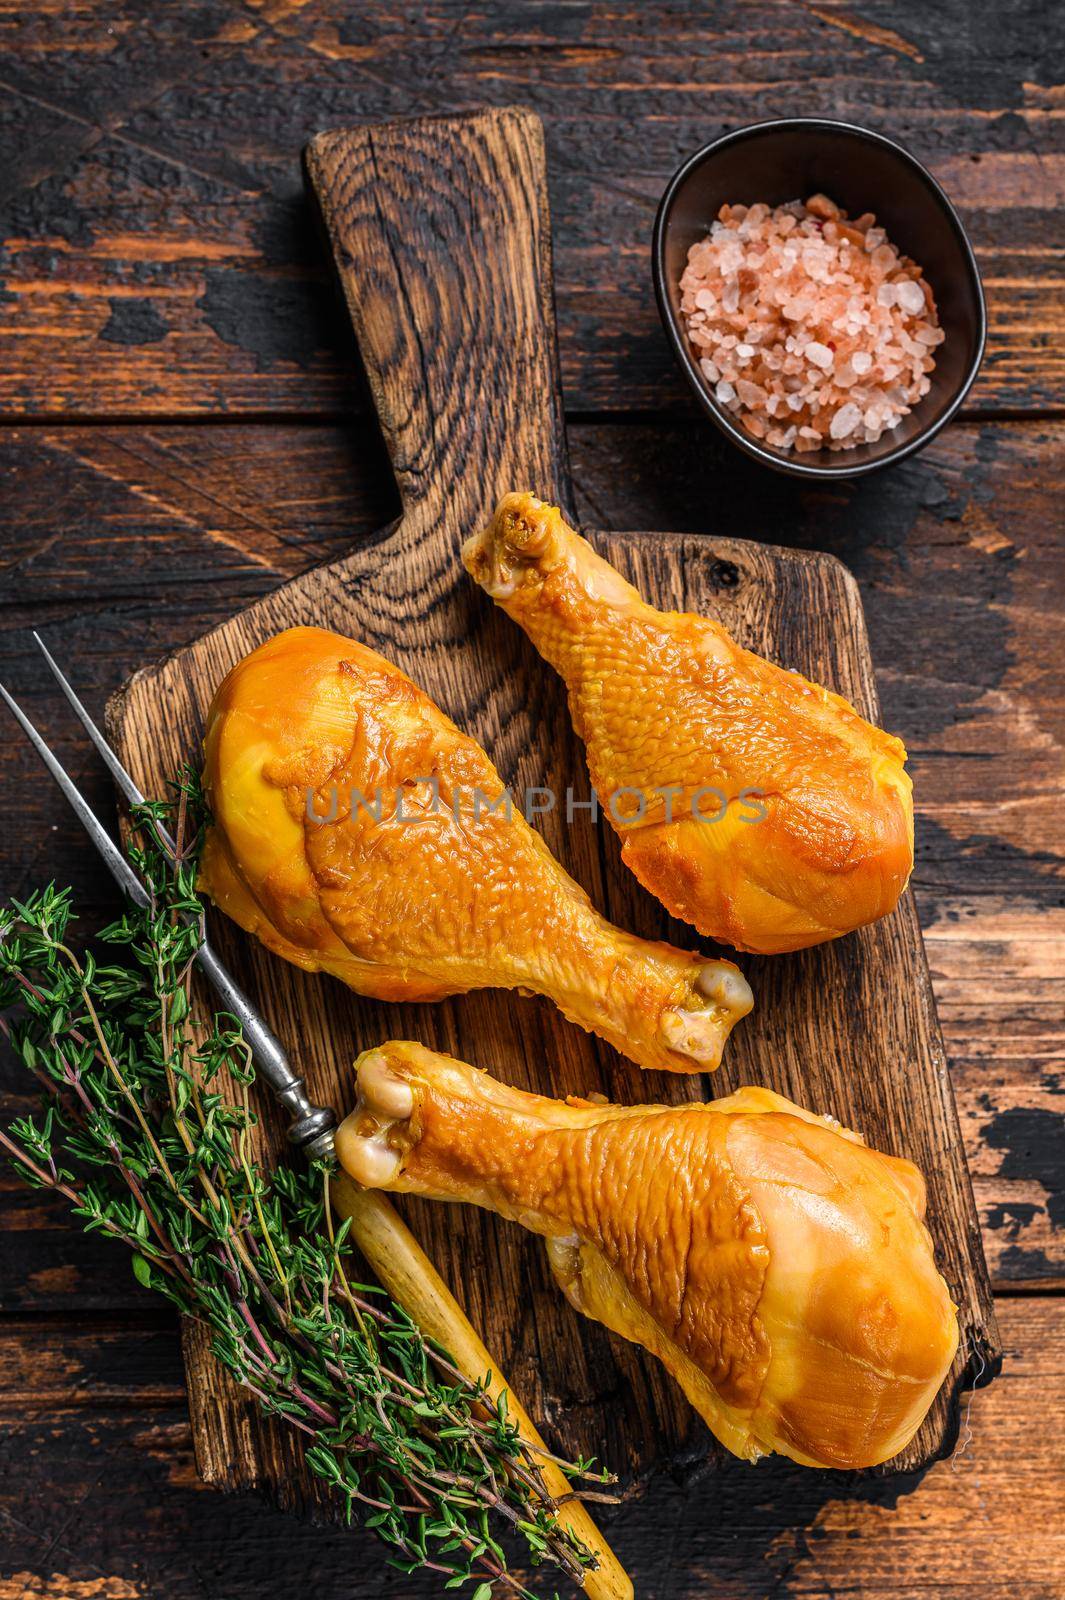 Marinated and Smoked chicken legs drumsticks on a wooden cutting board. Dark wooden background. Top view by Composter